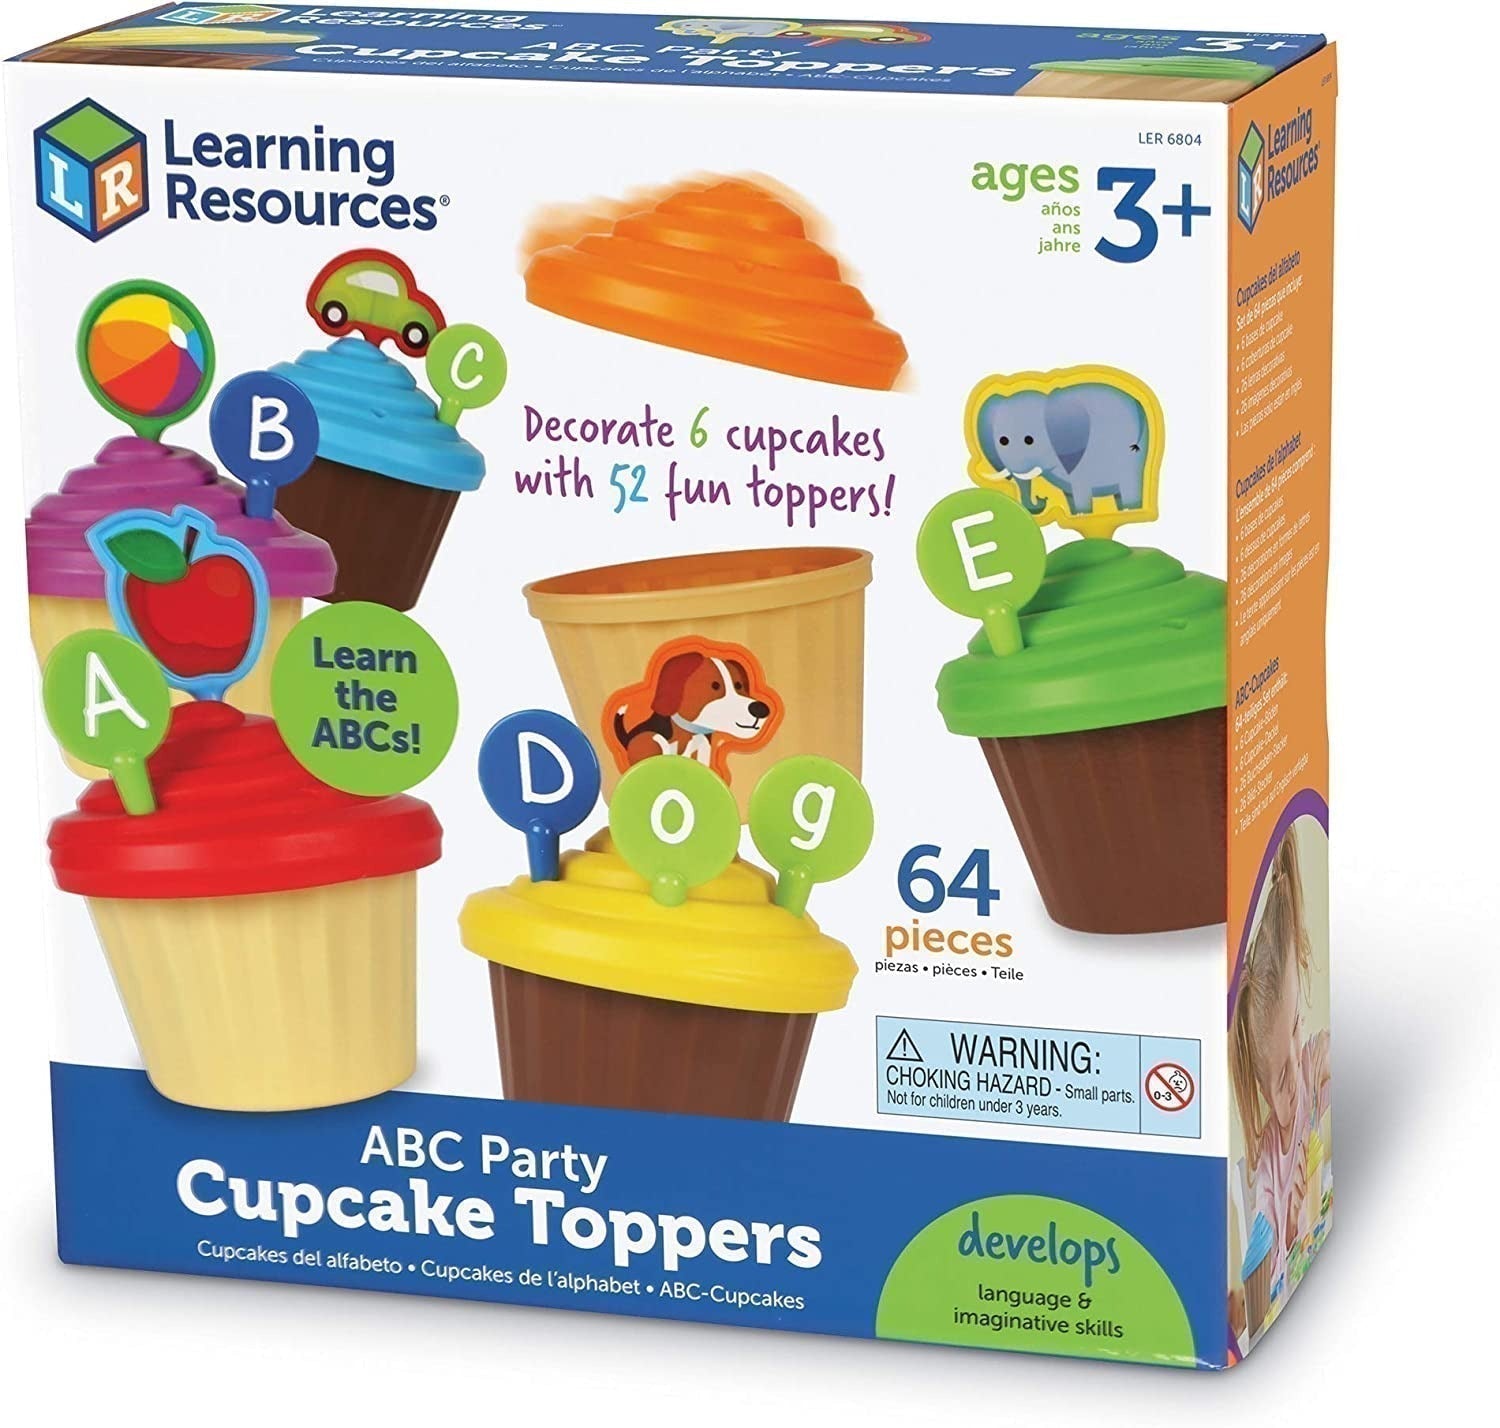 ABC Party Cupcake Toppers, Turn alphabet learning into fun learning! ABC Party Cupcake Toppers helps children to learn the alphabet, make simple words using the coloured alphabet and vocabulary toppers, improving their early language skills and communication! Use the ABC Party Cupcake Toppers to learn early language skills: alphabet, beginning sounds, vocabulary and more! Turn learning the ABCs into a treat-filled party! Kids learn alphabet and early language skills at every tea party with the ABC Party Cup